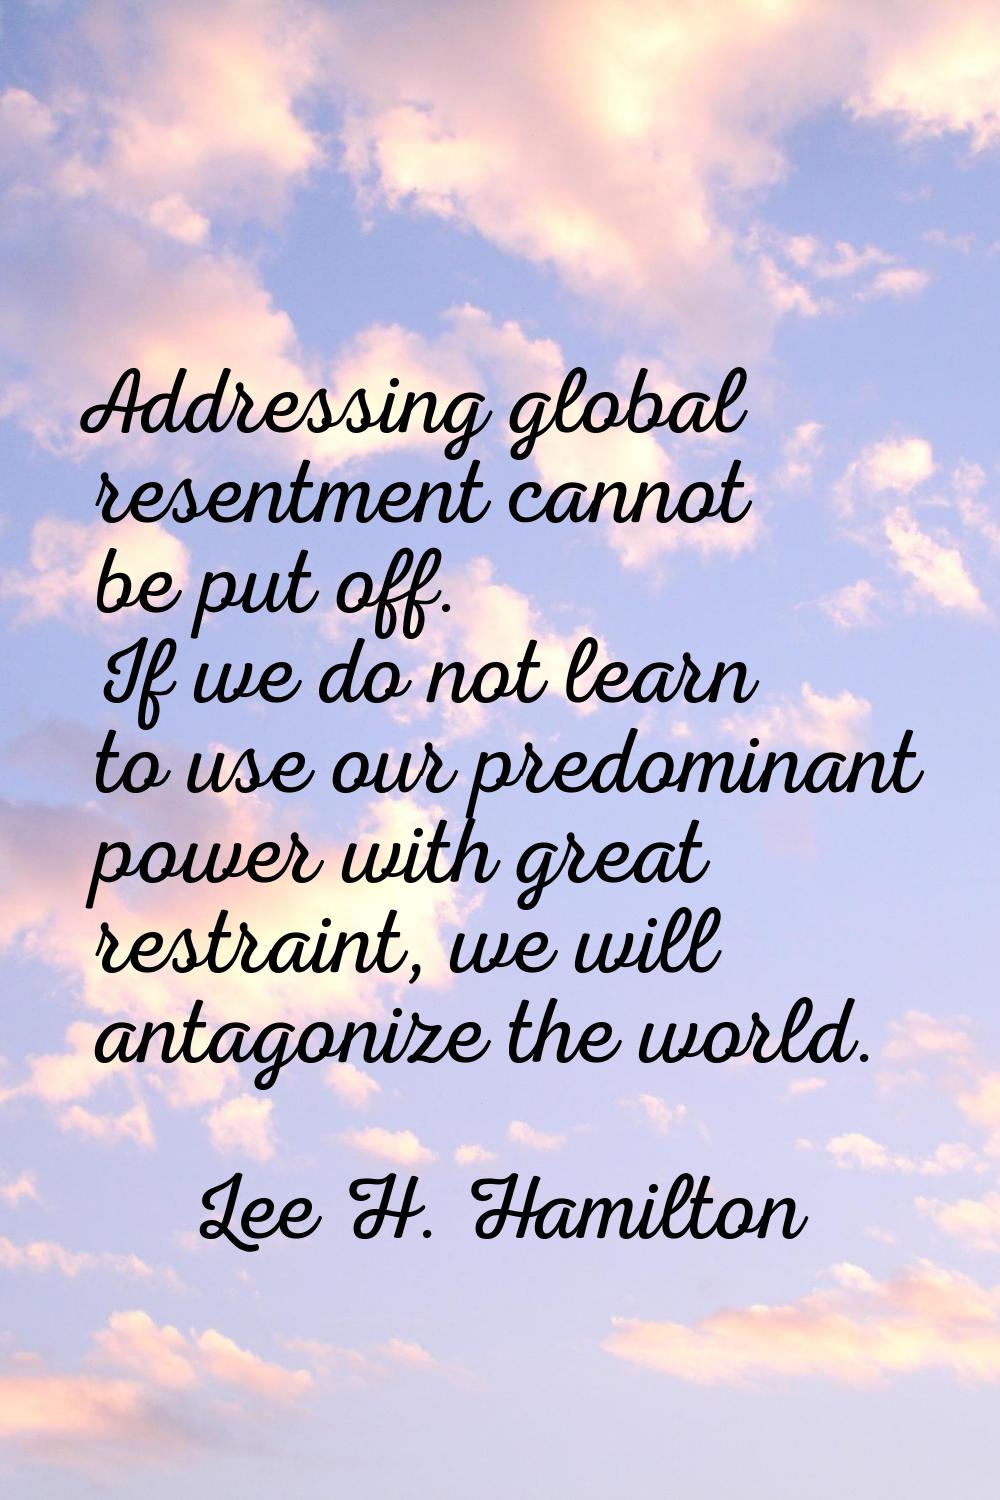 Addressing global resentment cannot be put off. If we do not learn to use our predominant power wit